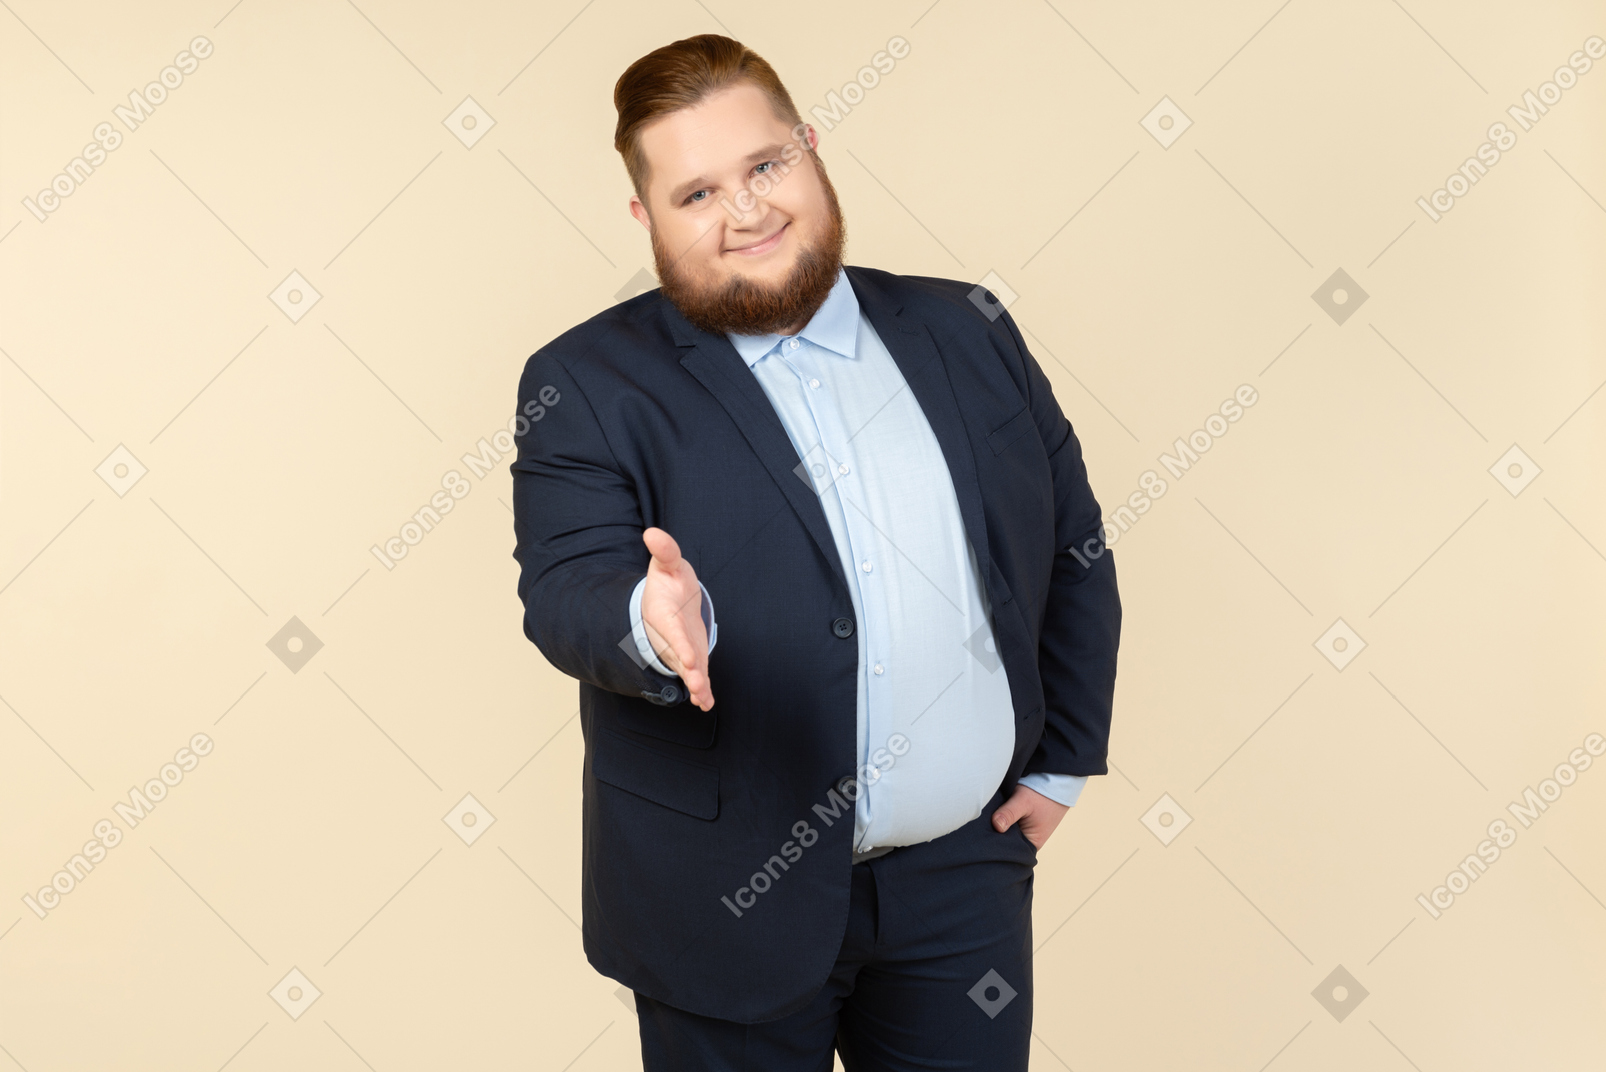 Young overweight man in suit giving a hand